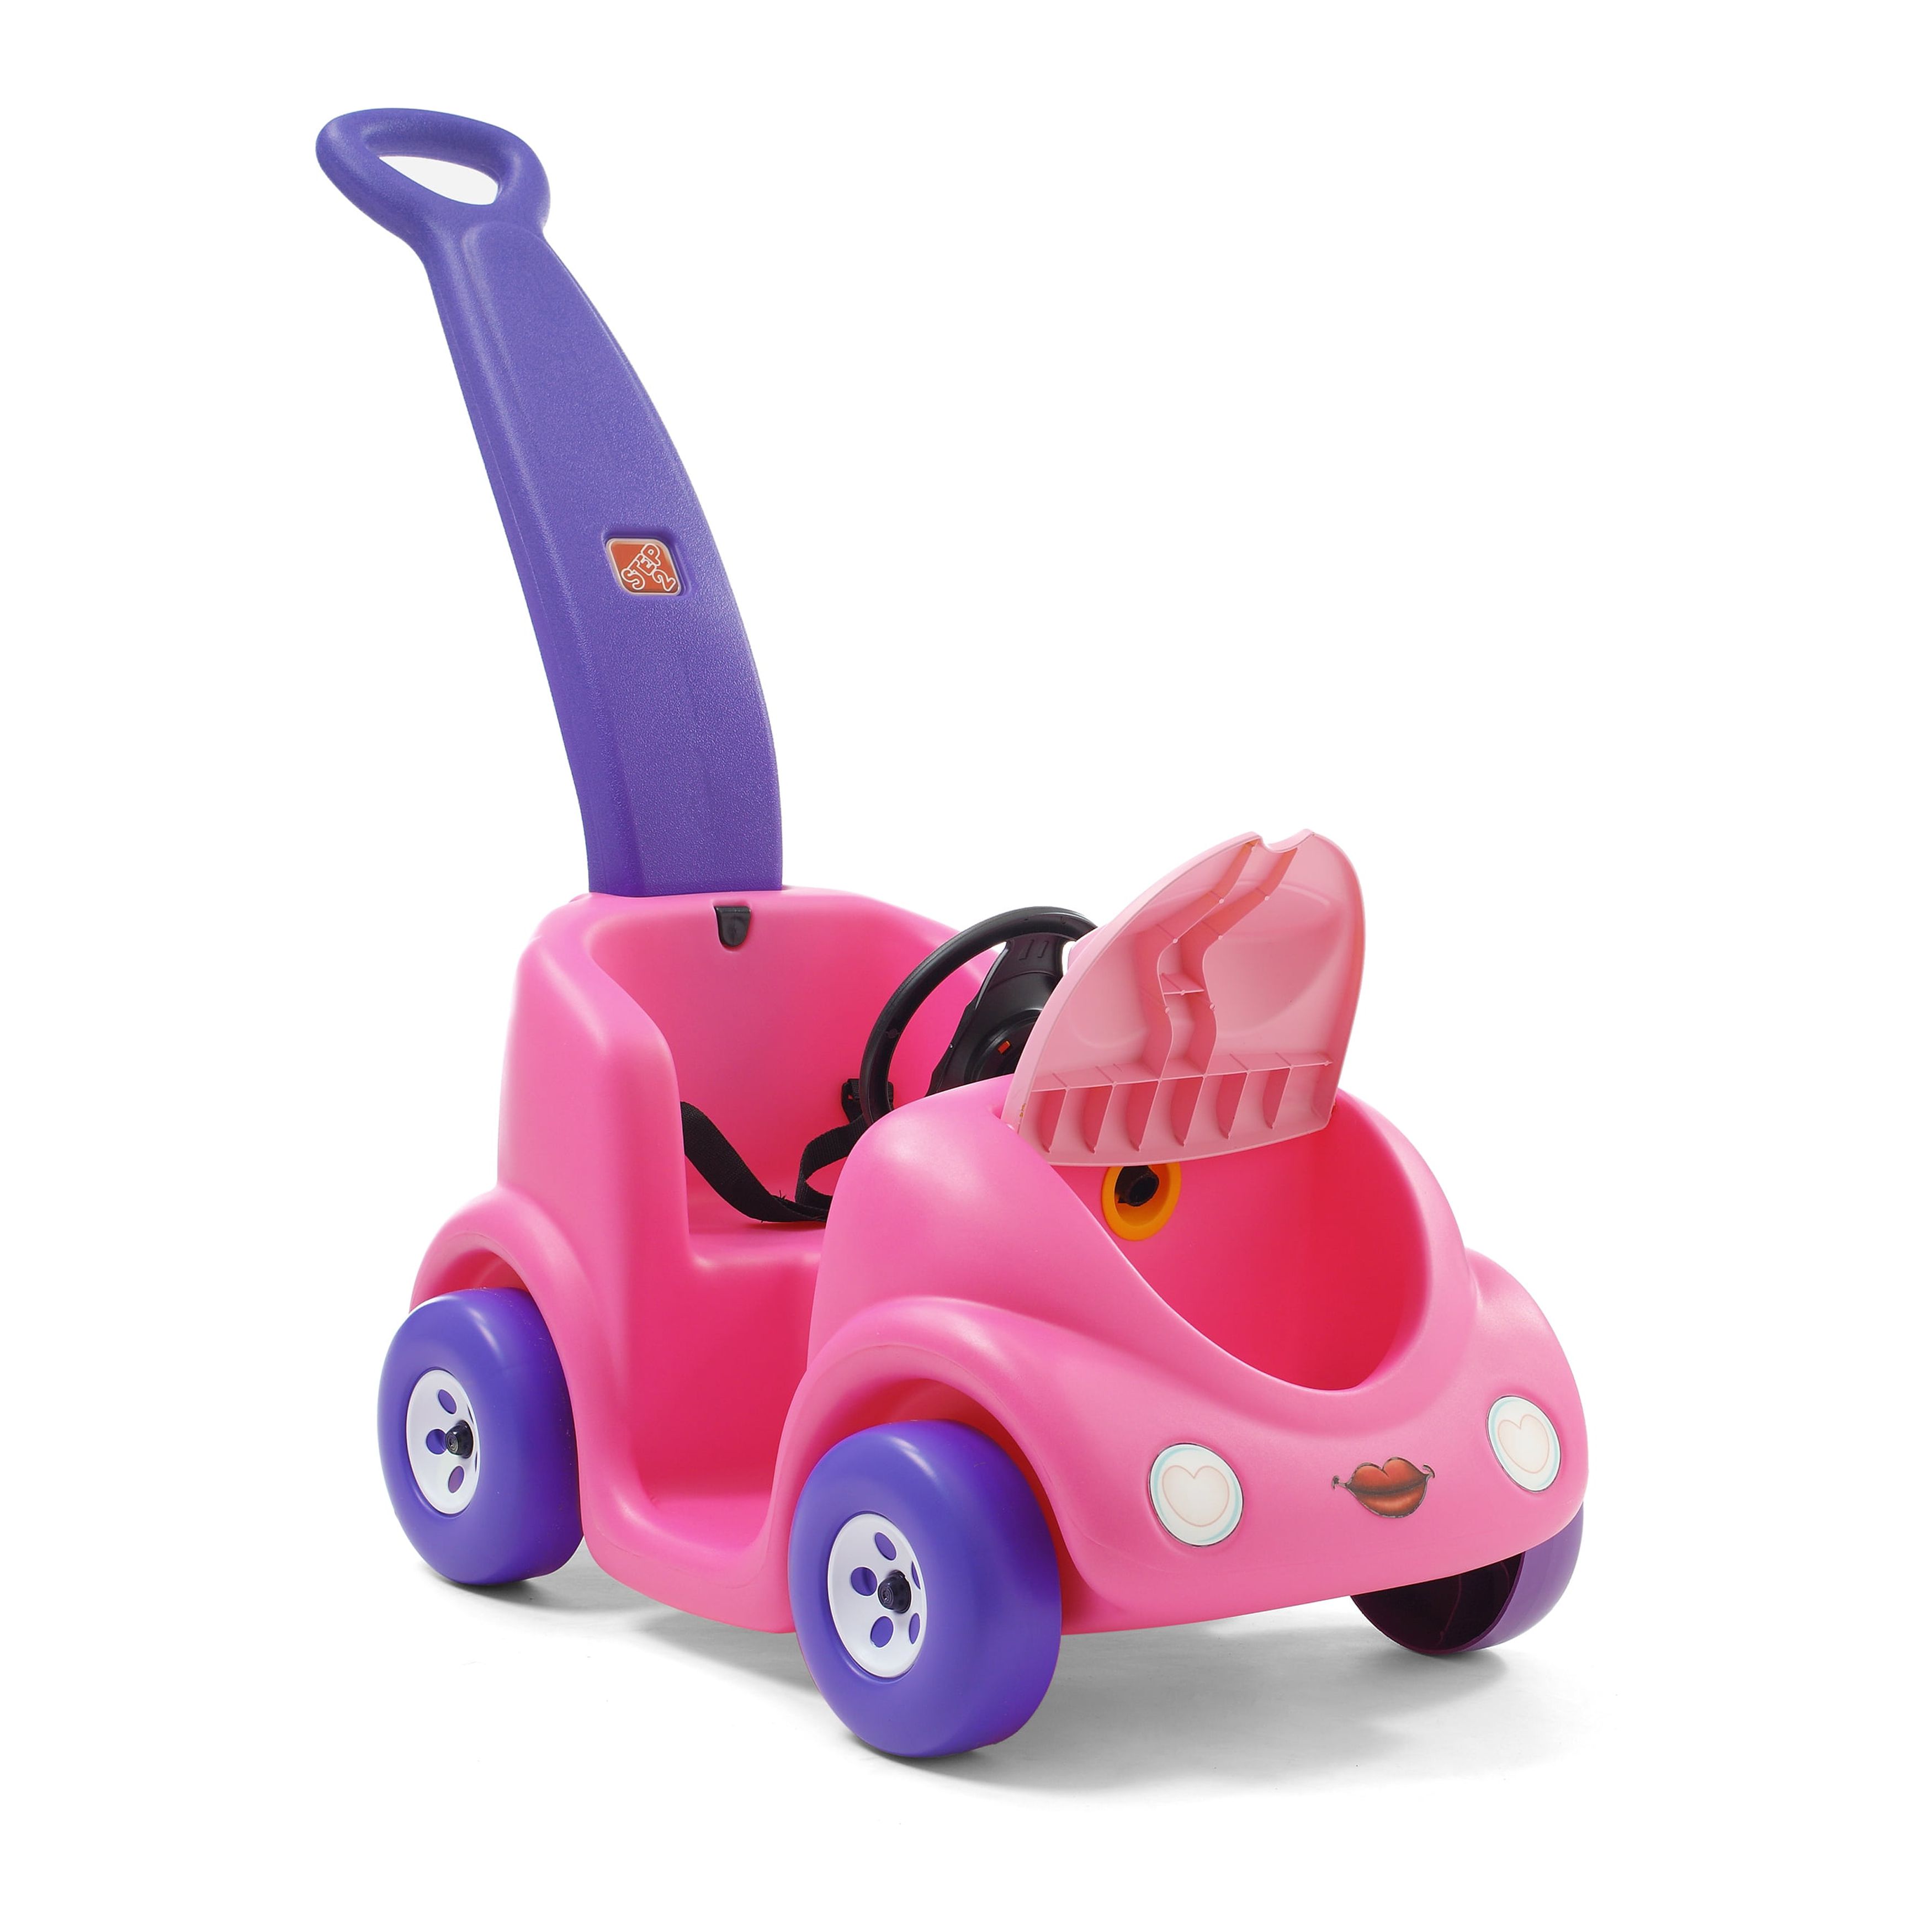 Step2 Push Around Buggy Pink 10th Anniversary Edition Kids Push Car and Ride On Toy for Toddler - image 5 of 9